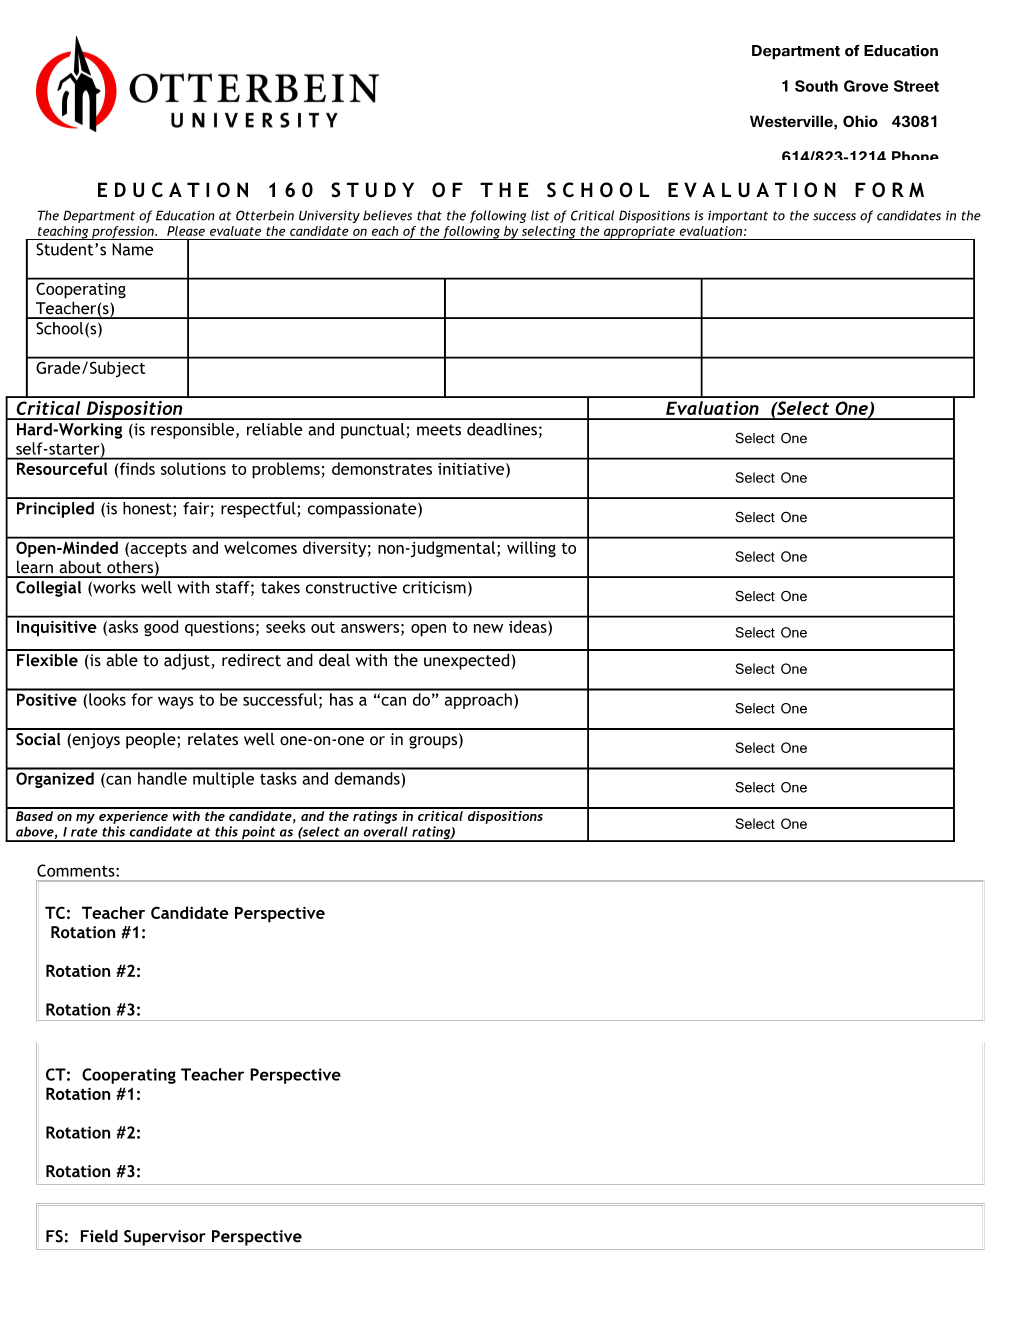 Education 160 Study of the School Evaluation Form